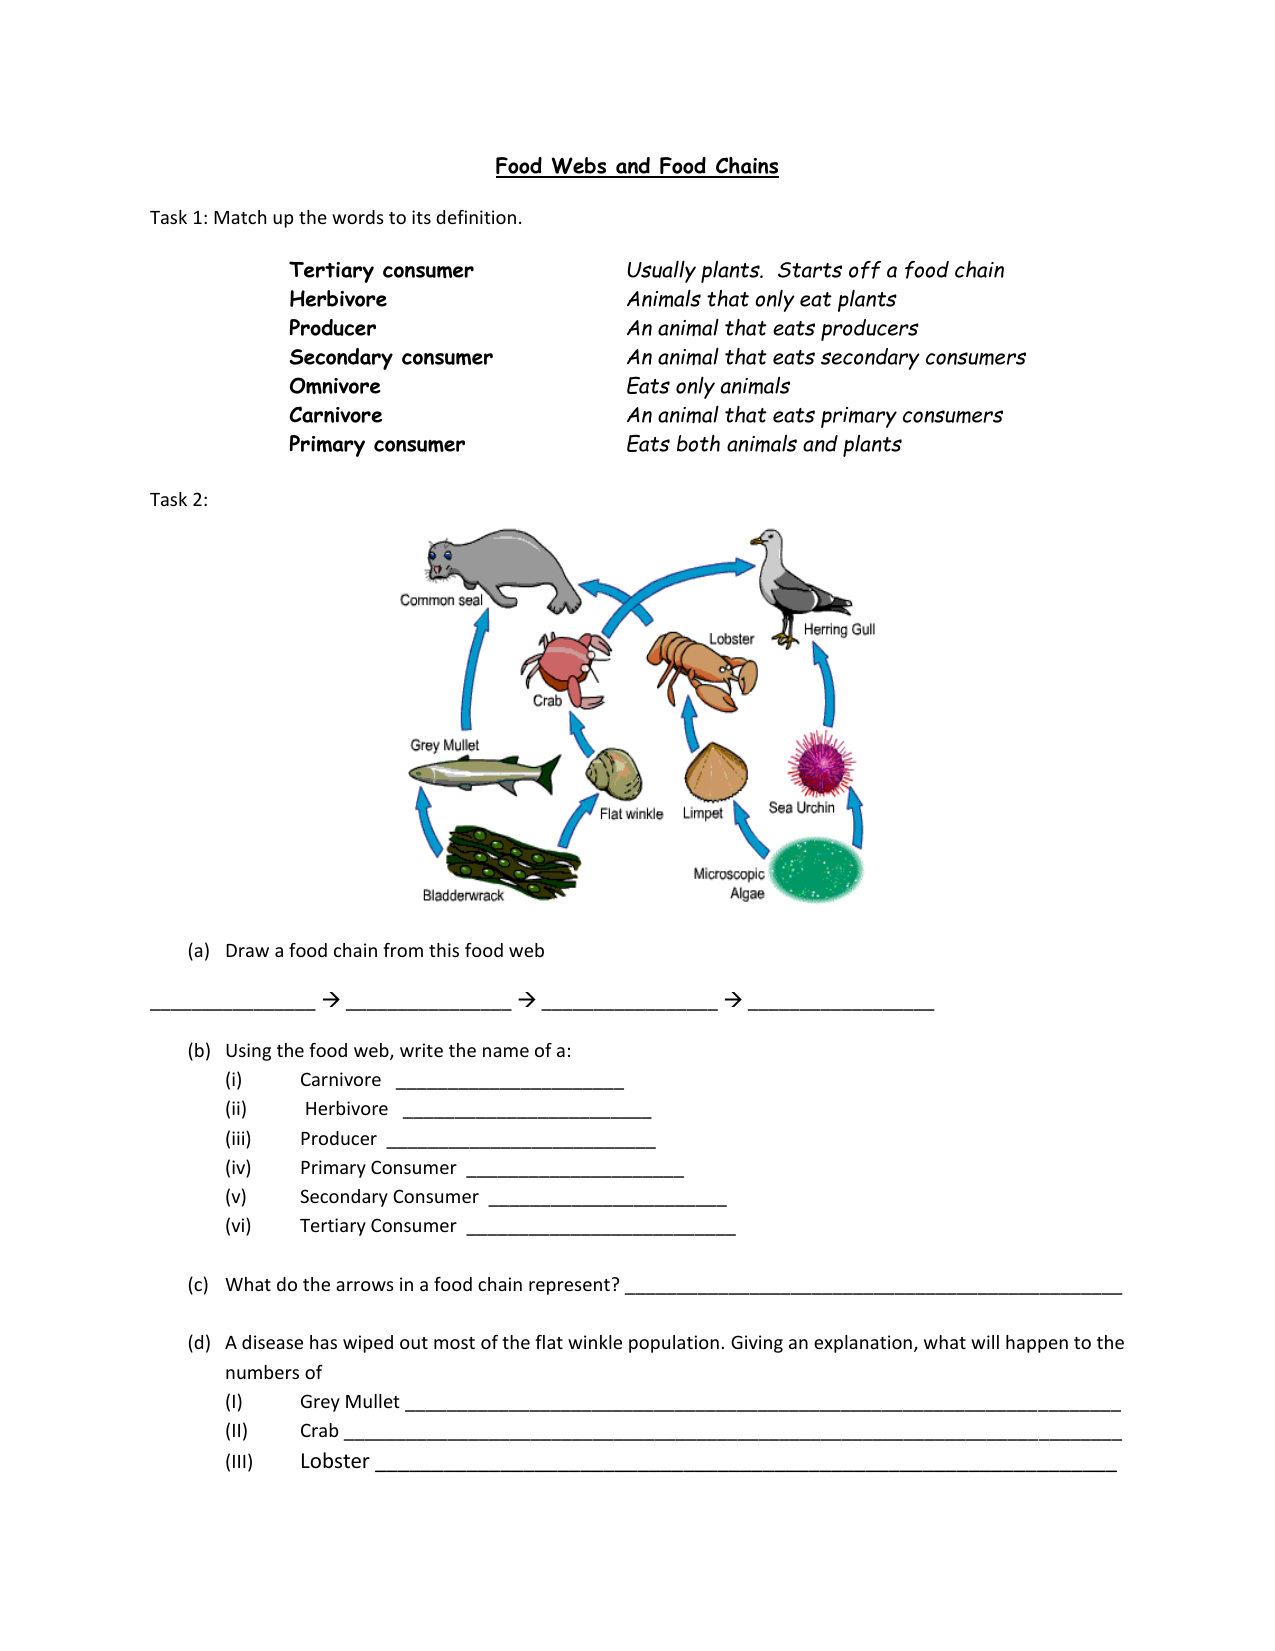 Food Chains And Webs Worksheet For Food Chains And Webs Worksheet